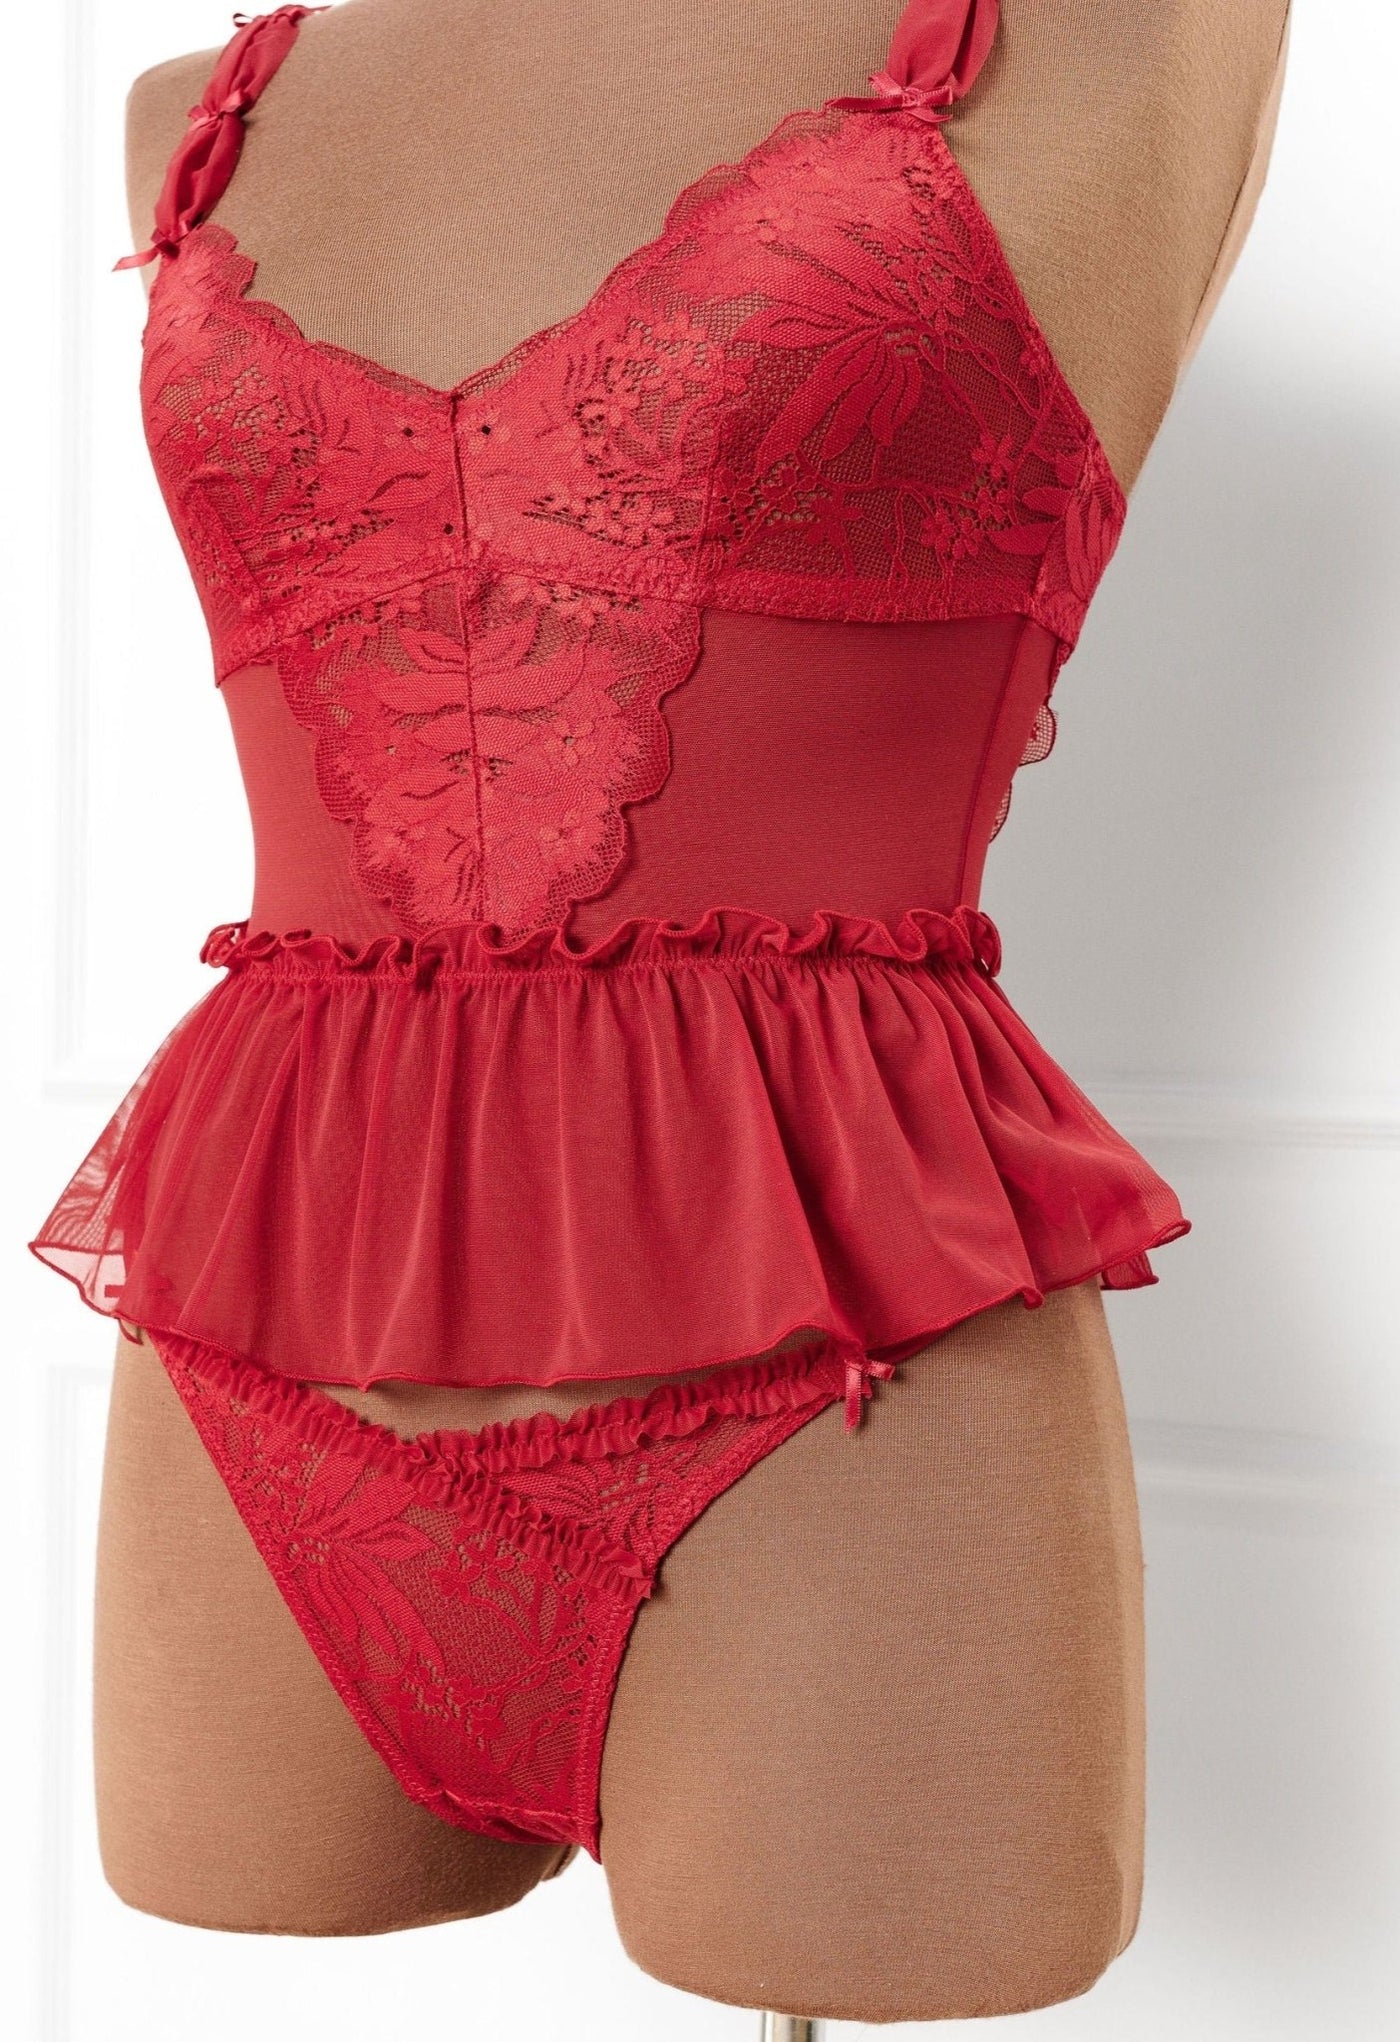 Lace & Mesh Peplum Corset - Scarlet Red - Mentionables